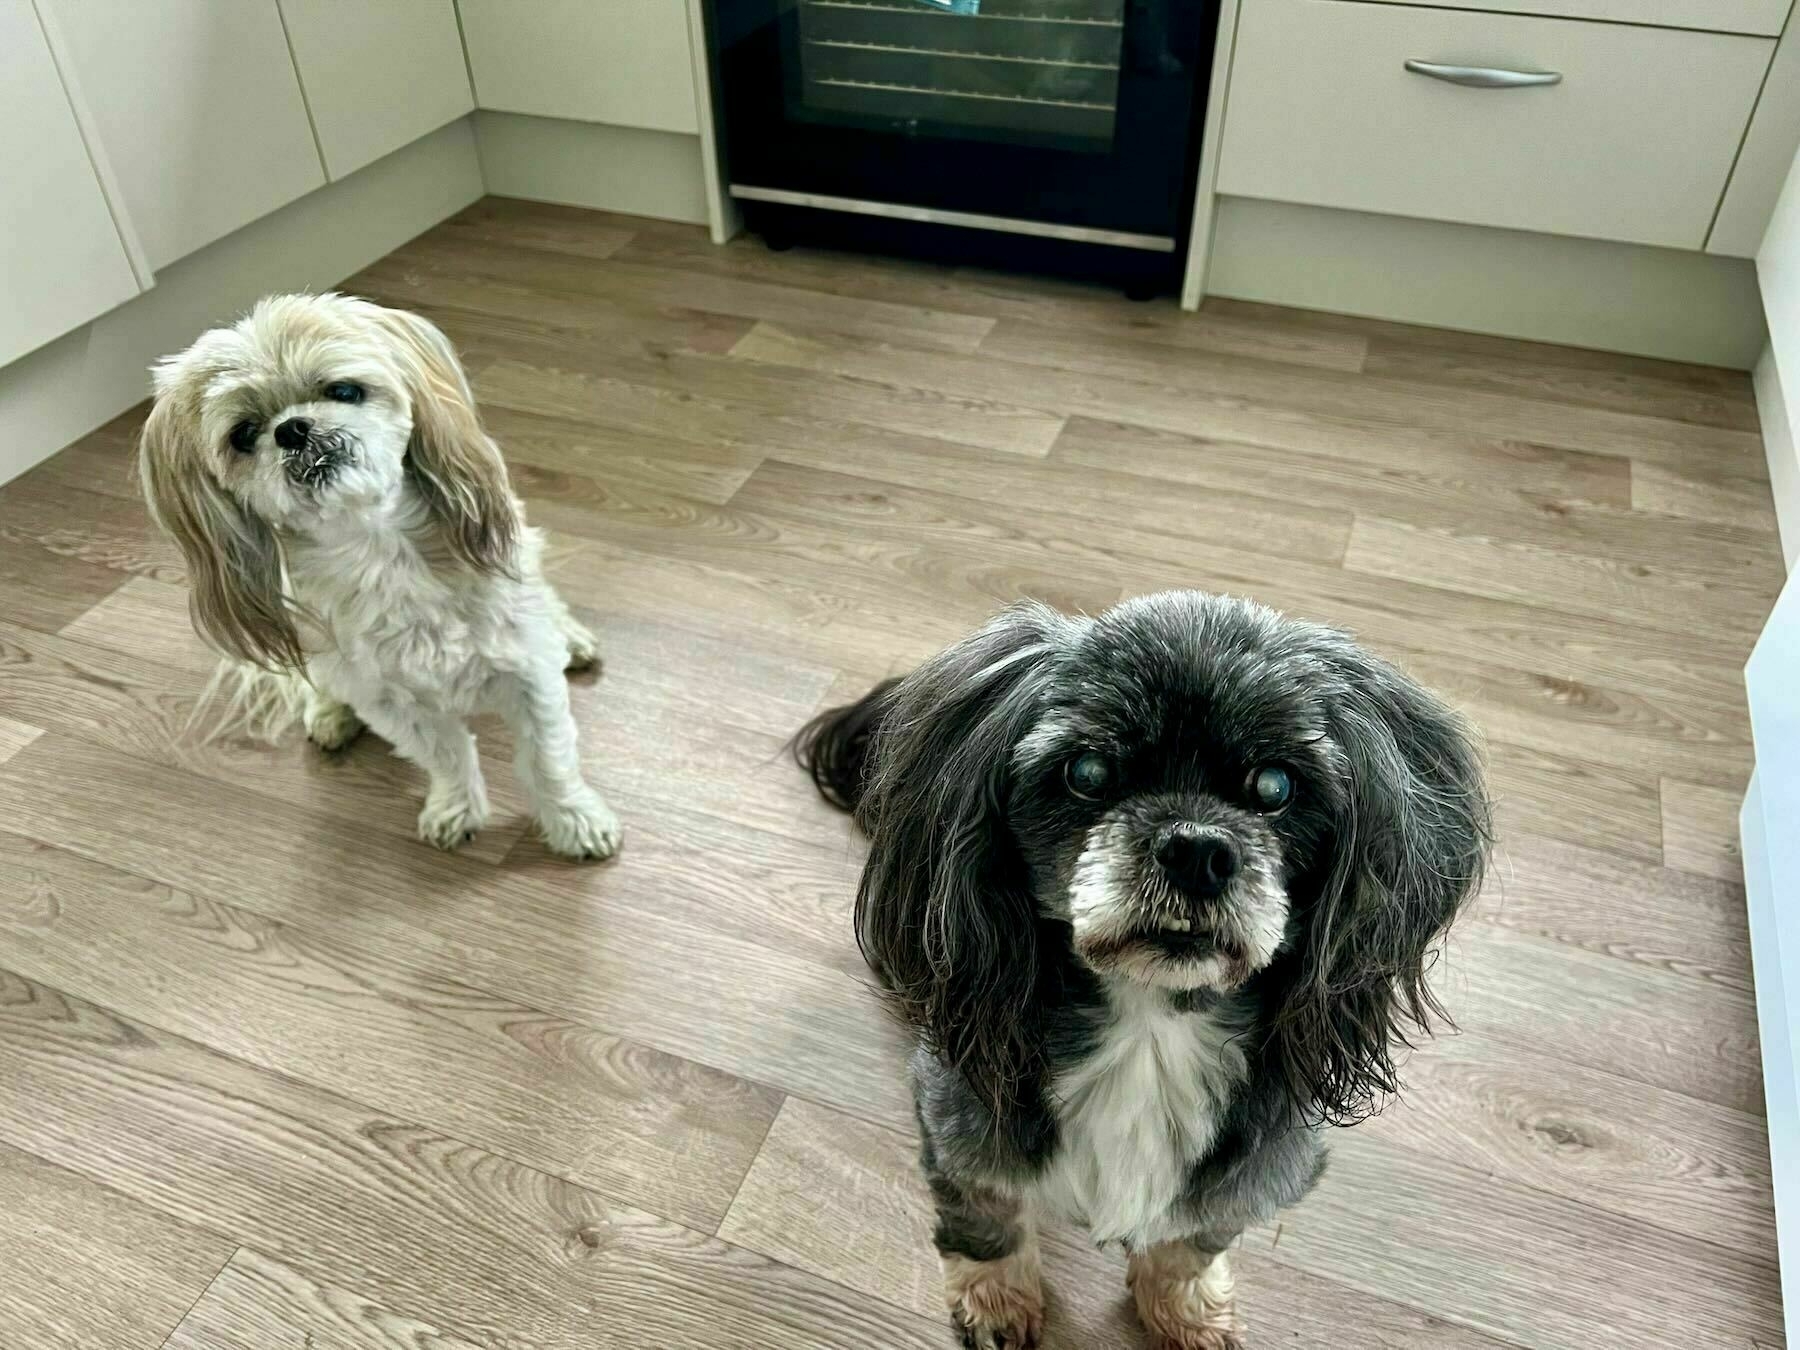 Two small dogs wait for breakfast. 